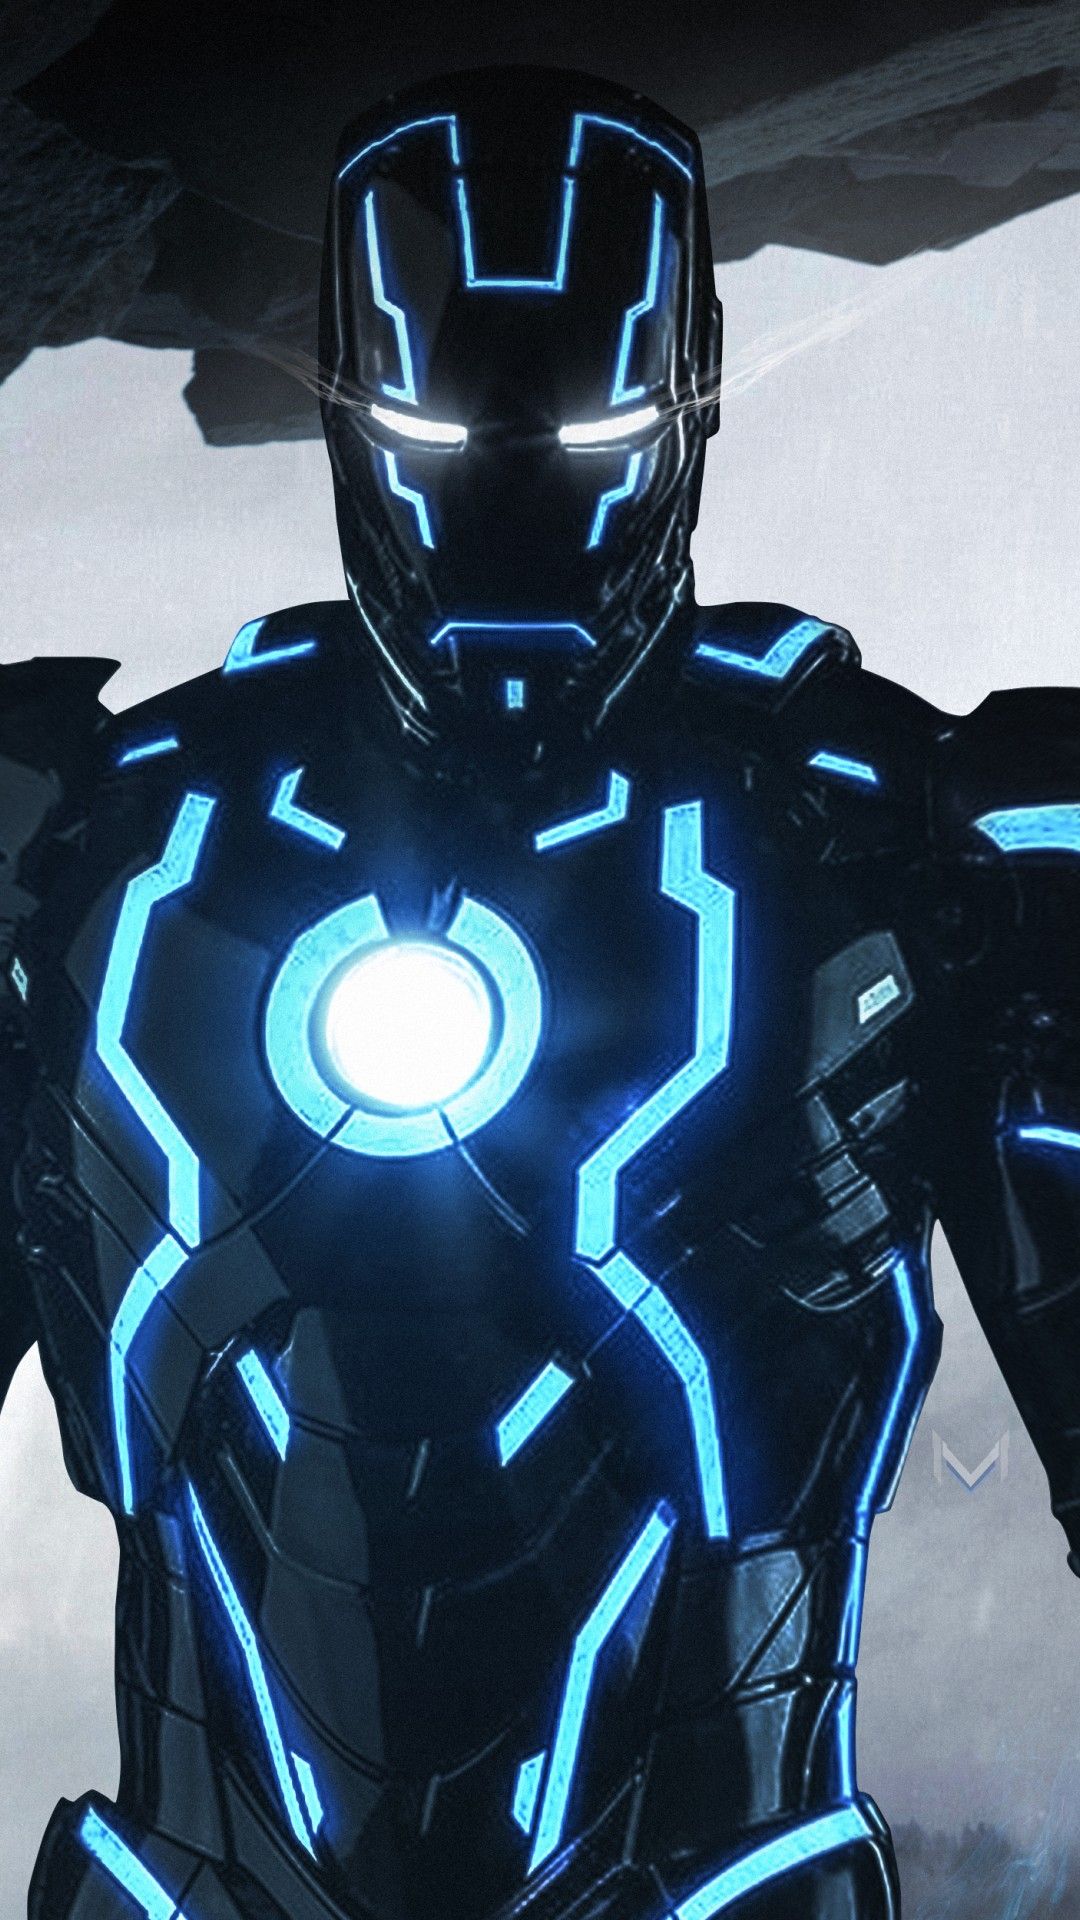 Neon Iron Man 4K Wallpaper iPhone 6 Plus Hot Desktop and background for your PC and mobile